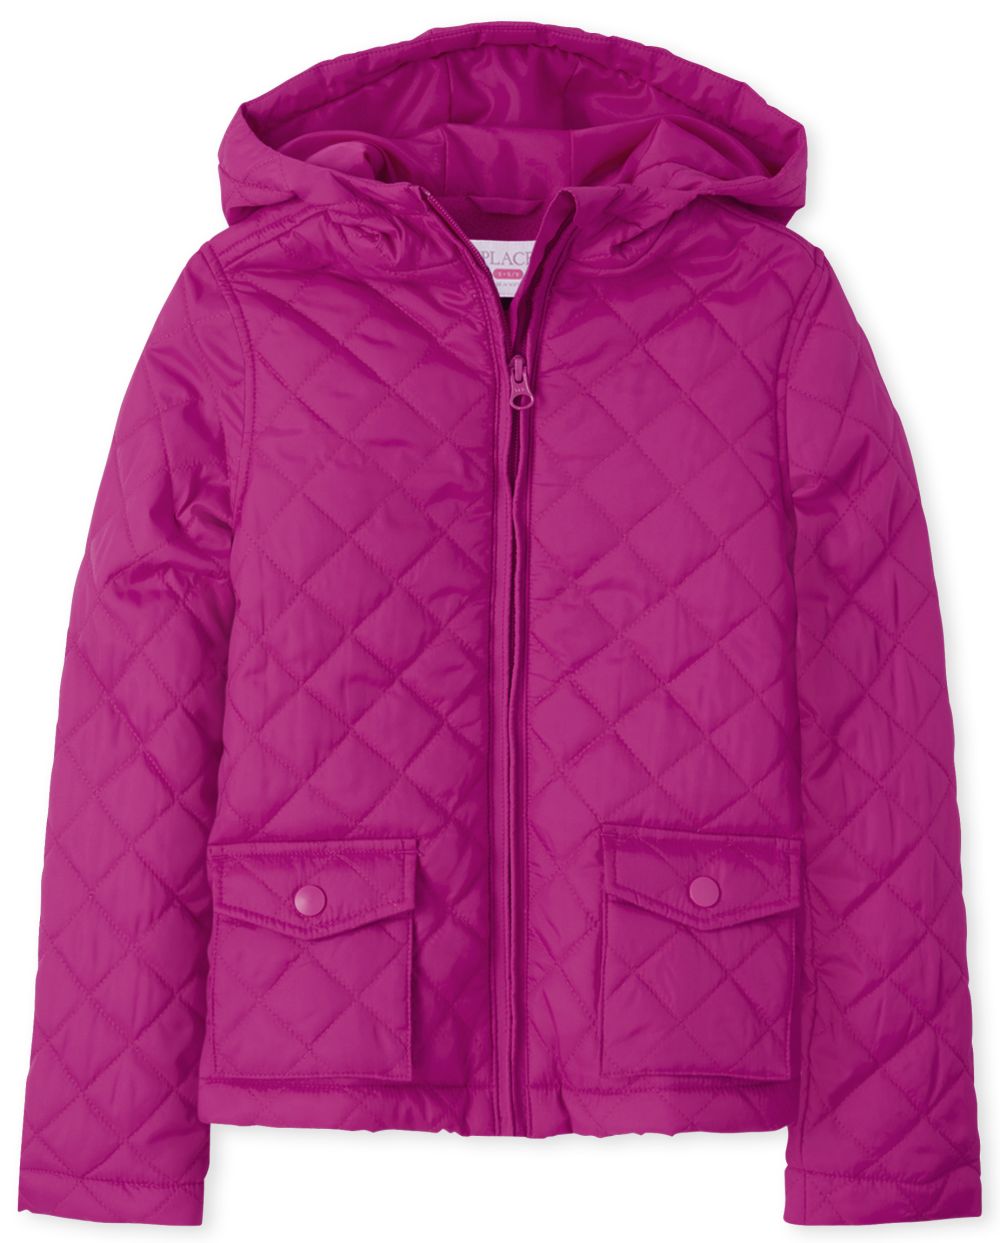 Girls Uniform Long Sleeve Quilted Hooded Jacket